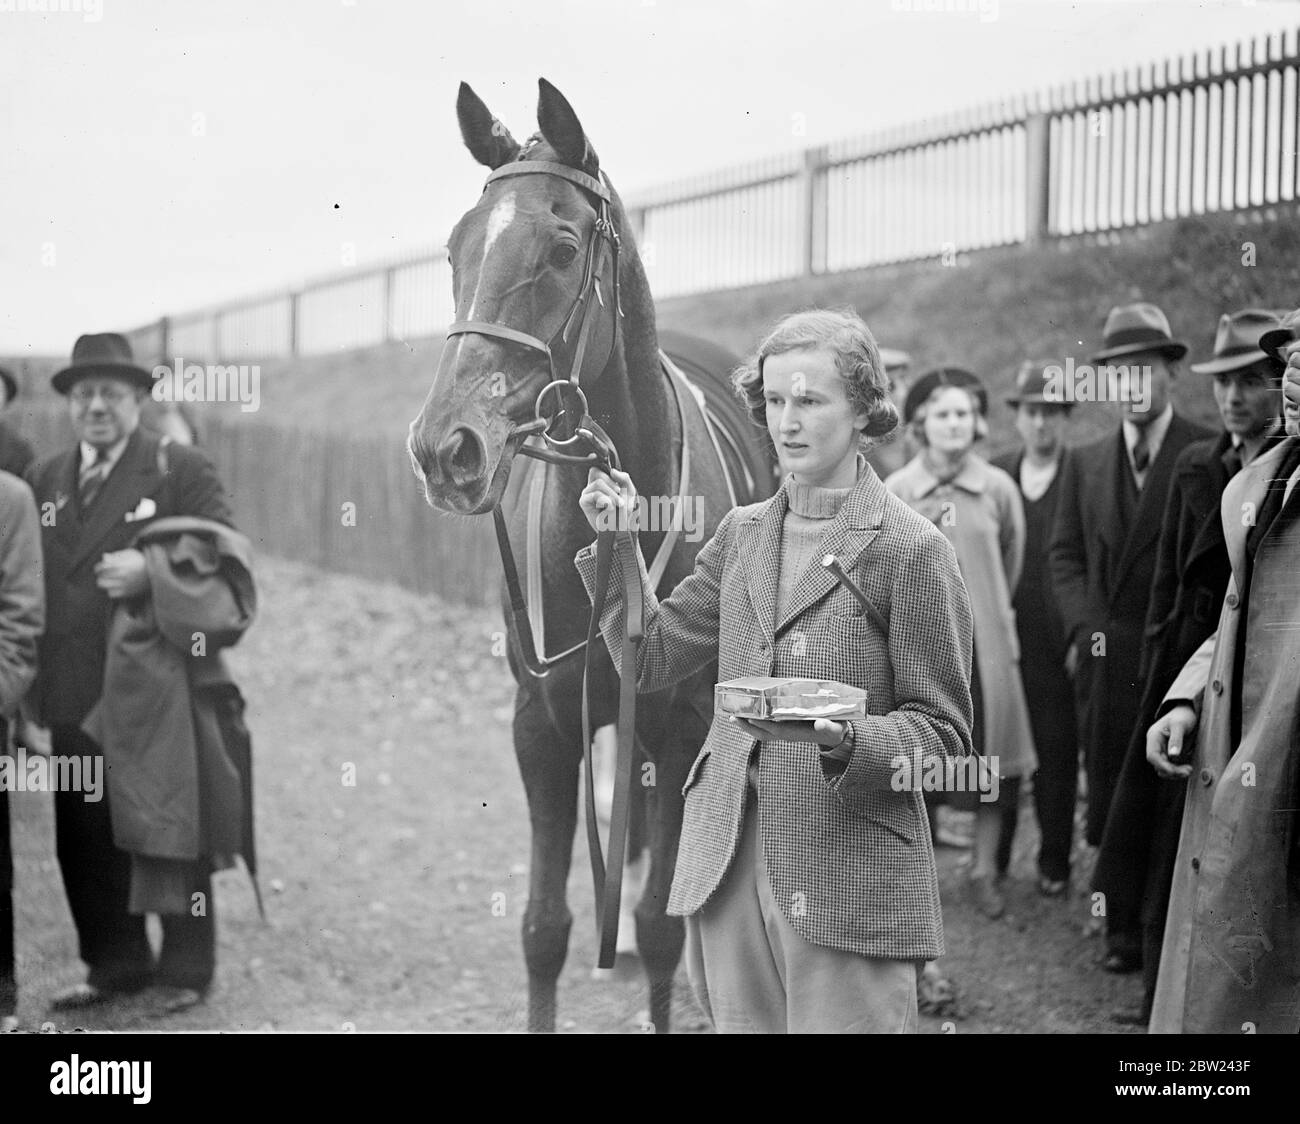 Winner of Britain's only race for women jockeys. Mrs S Langley, daughter of the Newmarket trainer, Walter Earl, one the Newmarket Town Plate, Britain's only race for women jockeys on Mr N E Dixons 'Lucky Patch' at Newmarket. The race, centuries old, is run over 4 miles and is a stern test of stamina for riders and horses. 13 October 1938 Stock Photo